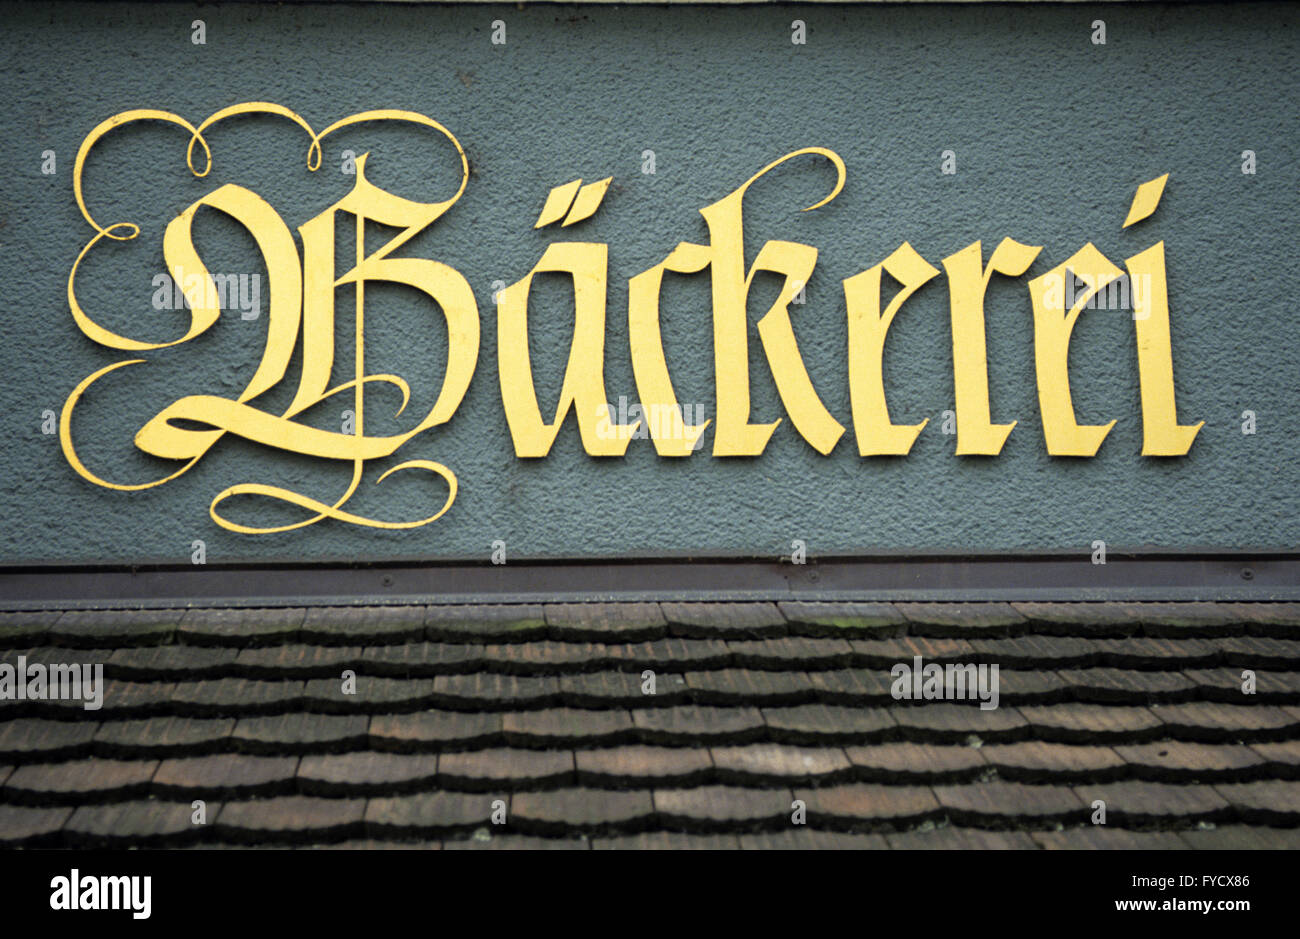 Bakery, lettering on house wall Stock Photo